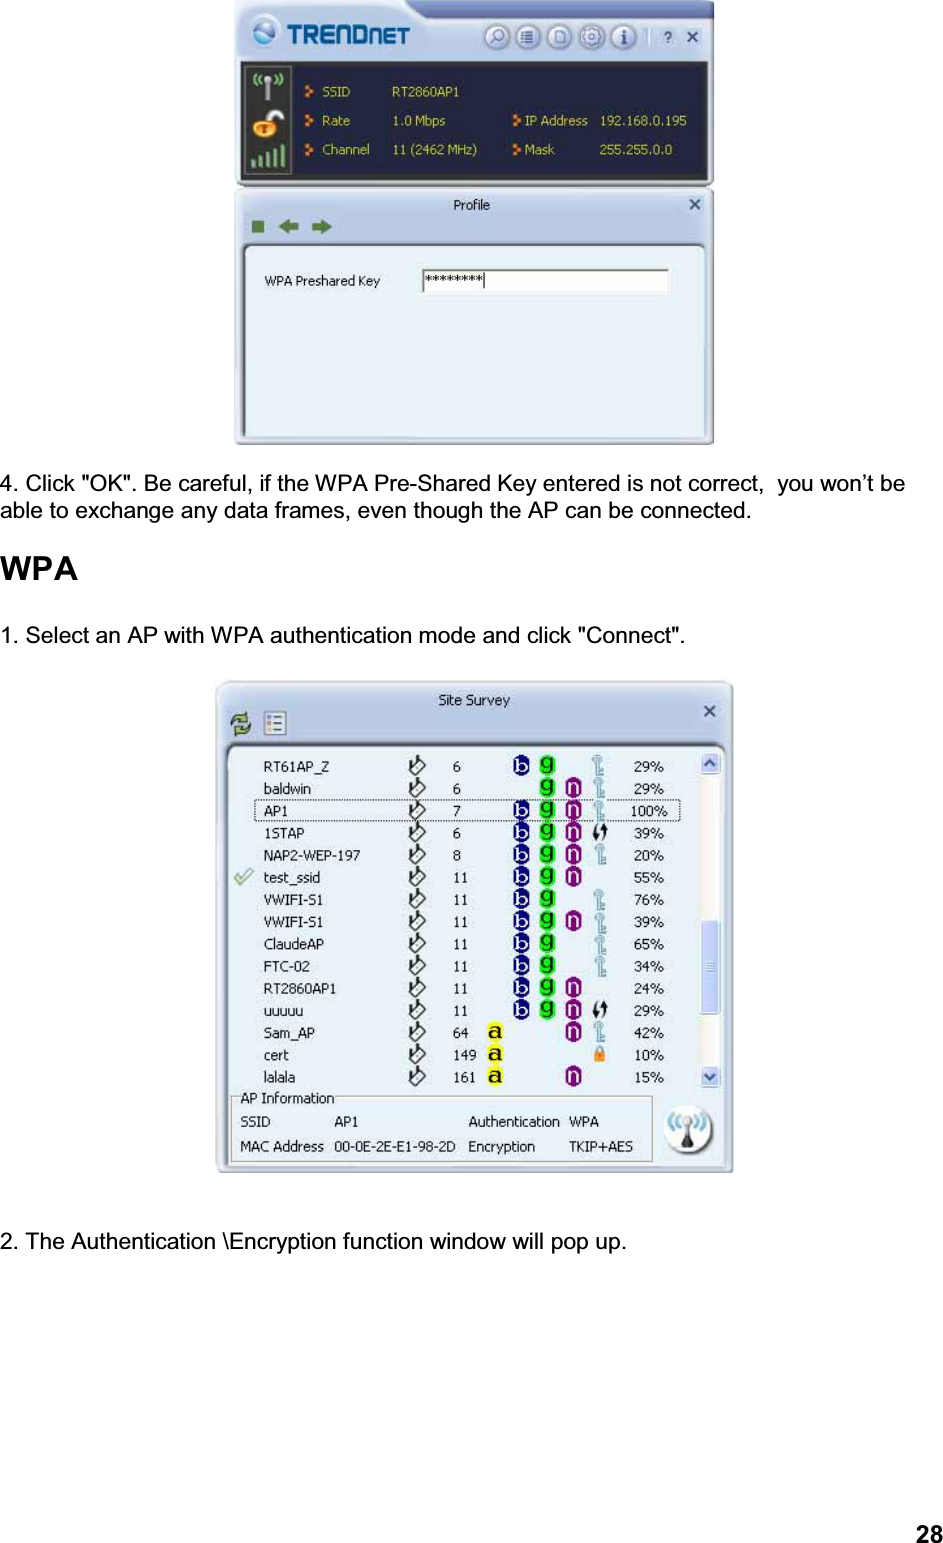 284. Click &quot;OK&quot;. Be careful, if the WPA Pre-Shared Key entered is not correct,  you won’t be able to exchange any data frames, even though the AP can be connected.WPA1. Select an AP with WPA authentication mode and click &quot;Connect&quot;.       2. The Authentication \Encryption function window will pop up.